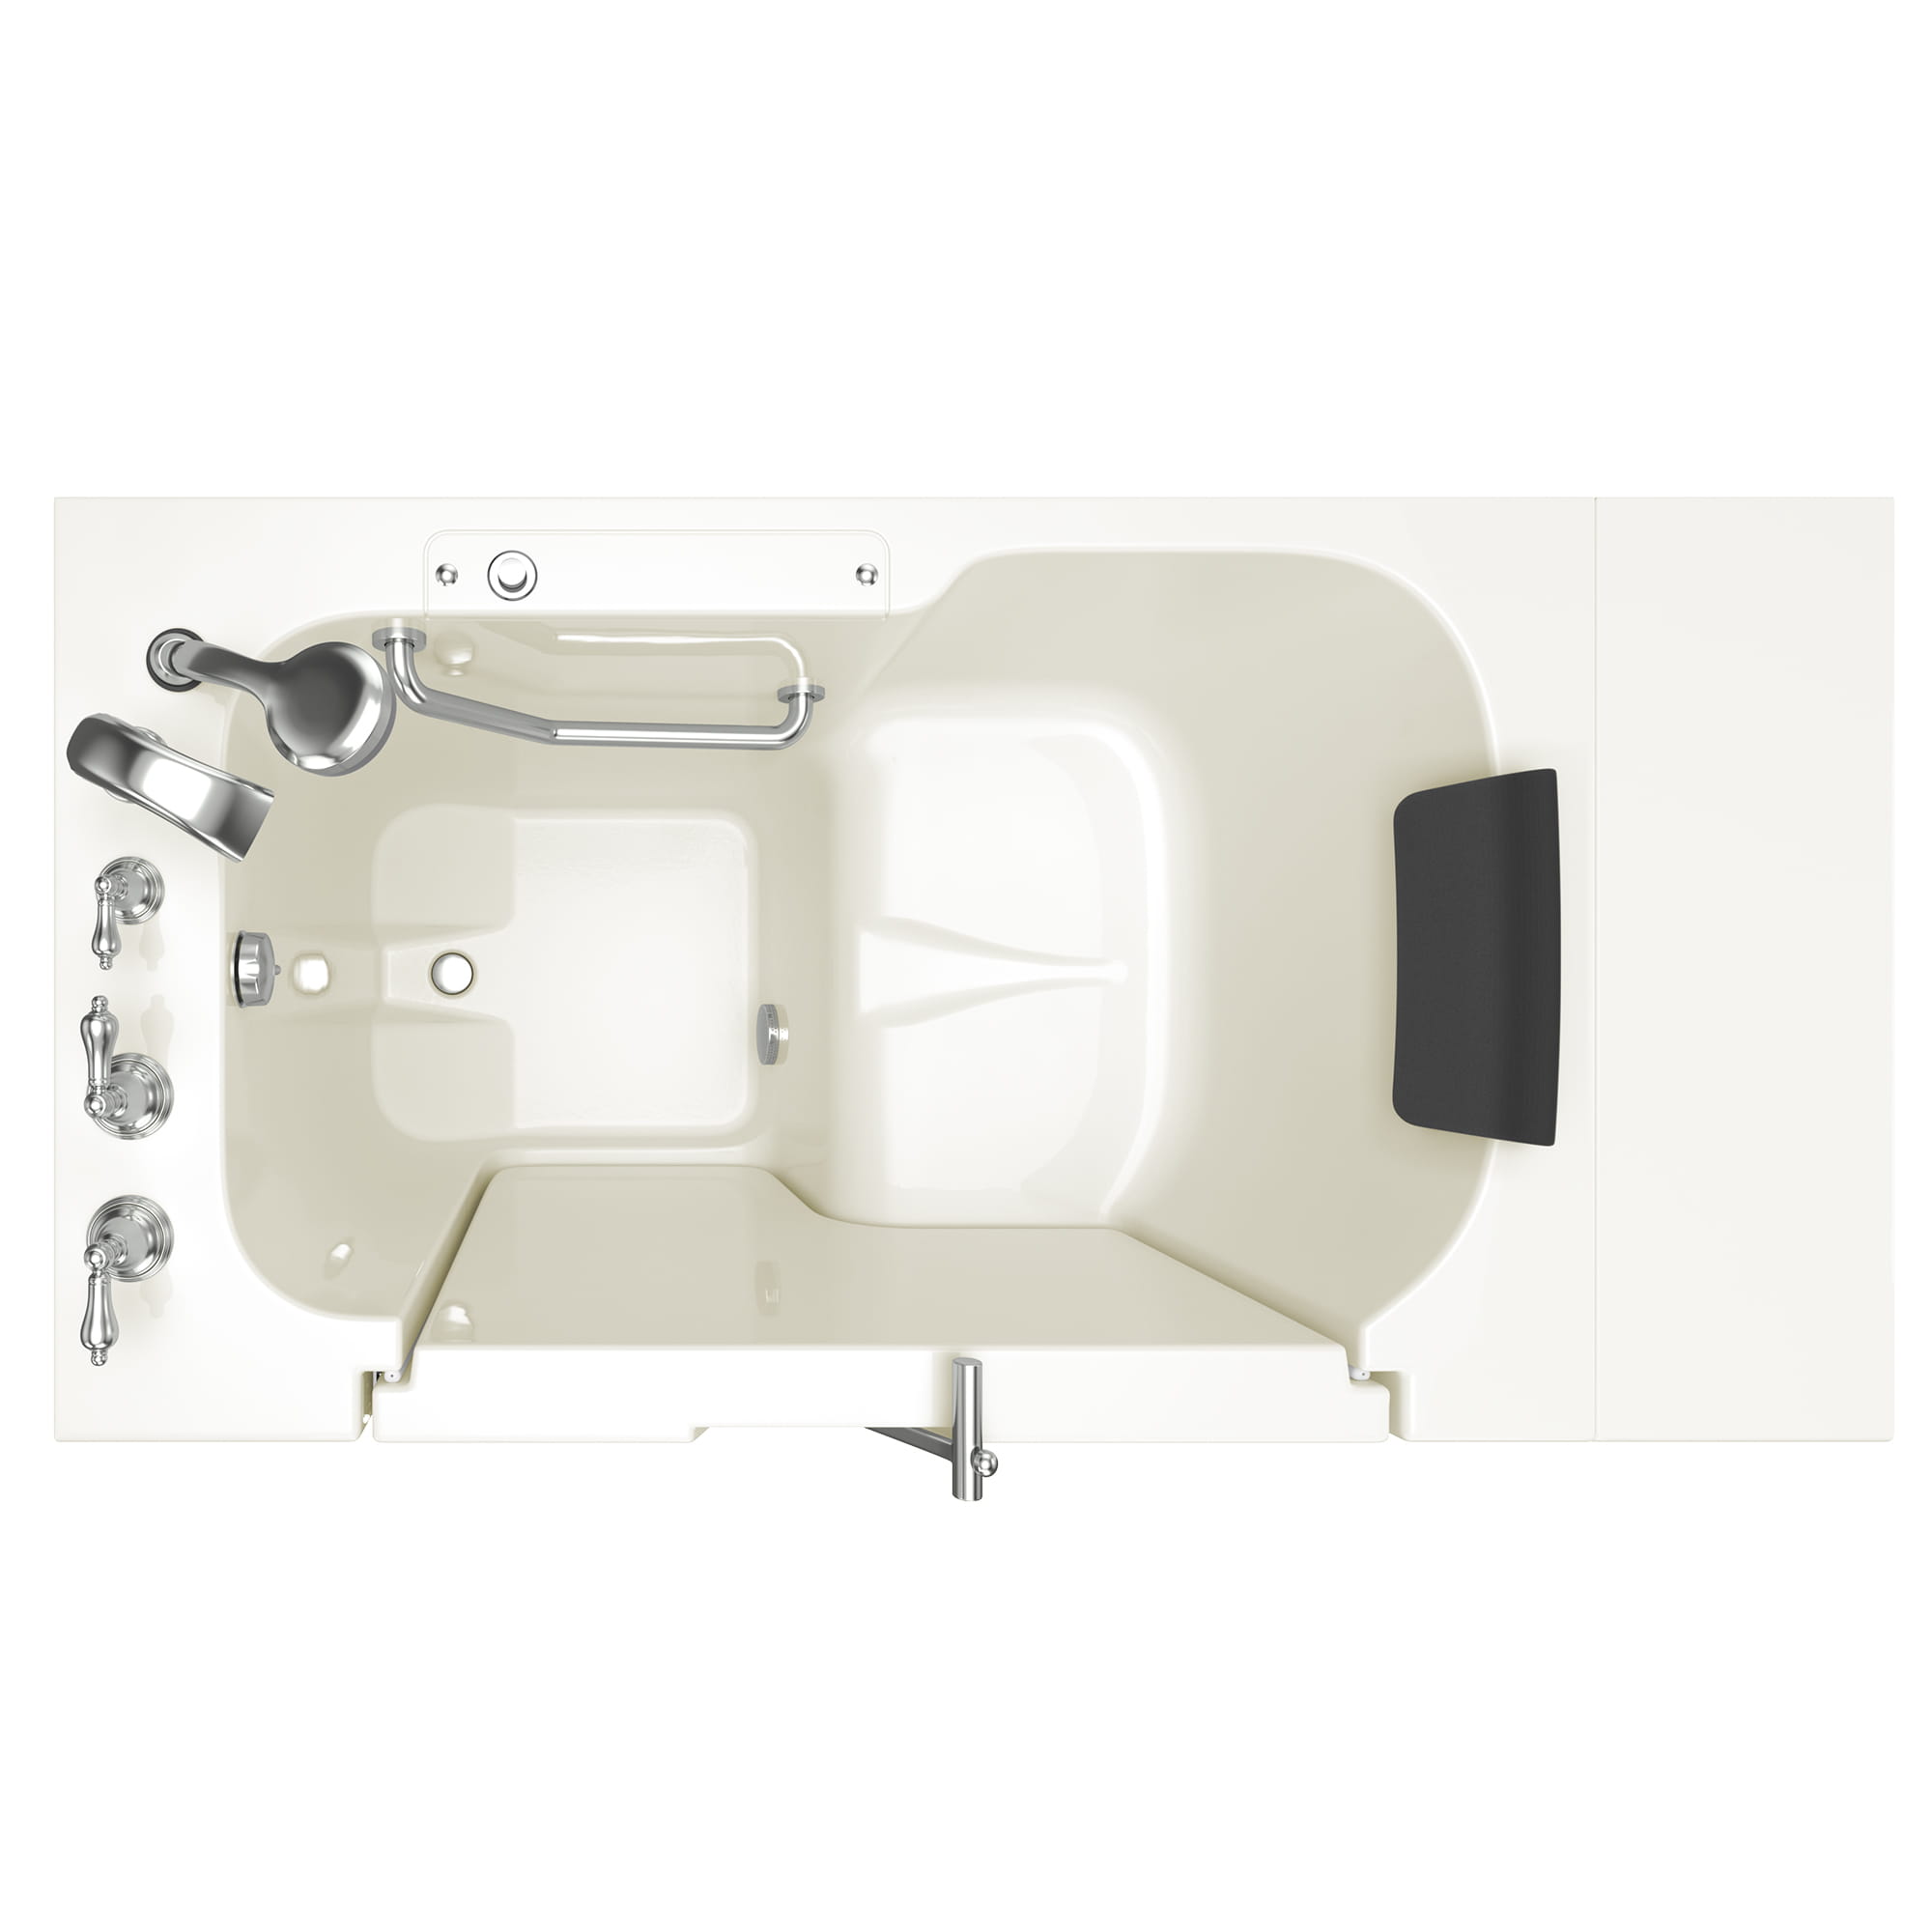 Gelcoat Premium Series 32 x 52  Inch Walk in Tub With Soaker System   Left Hand Drain With Faucet WIB LINEN